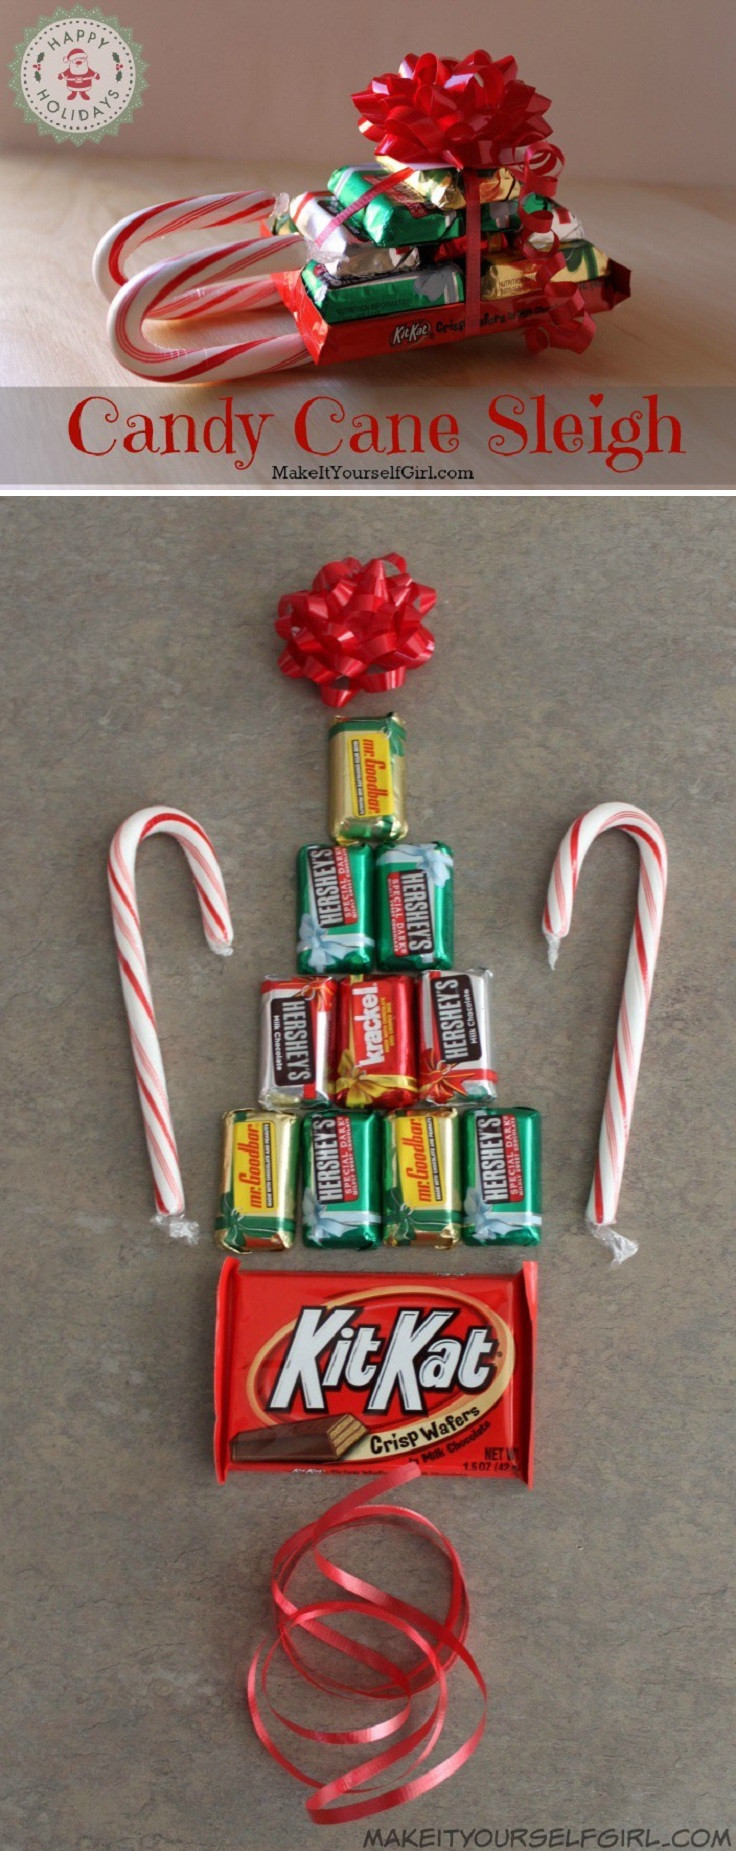 Holiday Candy Gift Ideas
 12 Wondrous DIY Candy Cane Sleigh Ideas That Will Leave Your Kids Open Mouthed